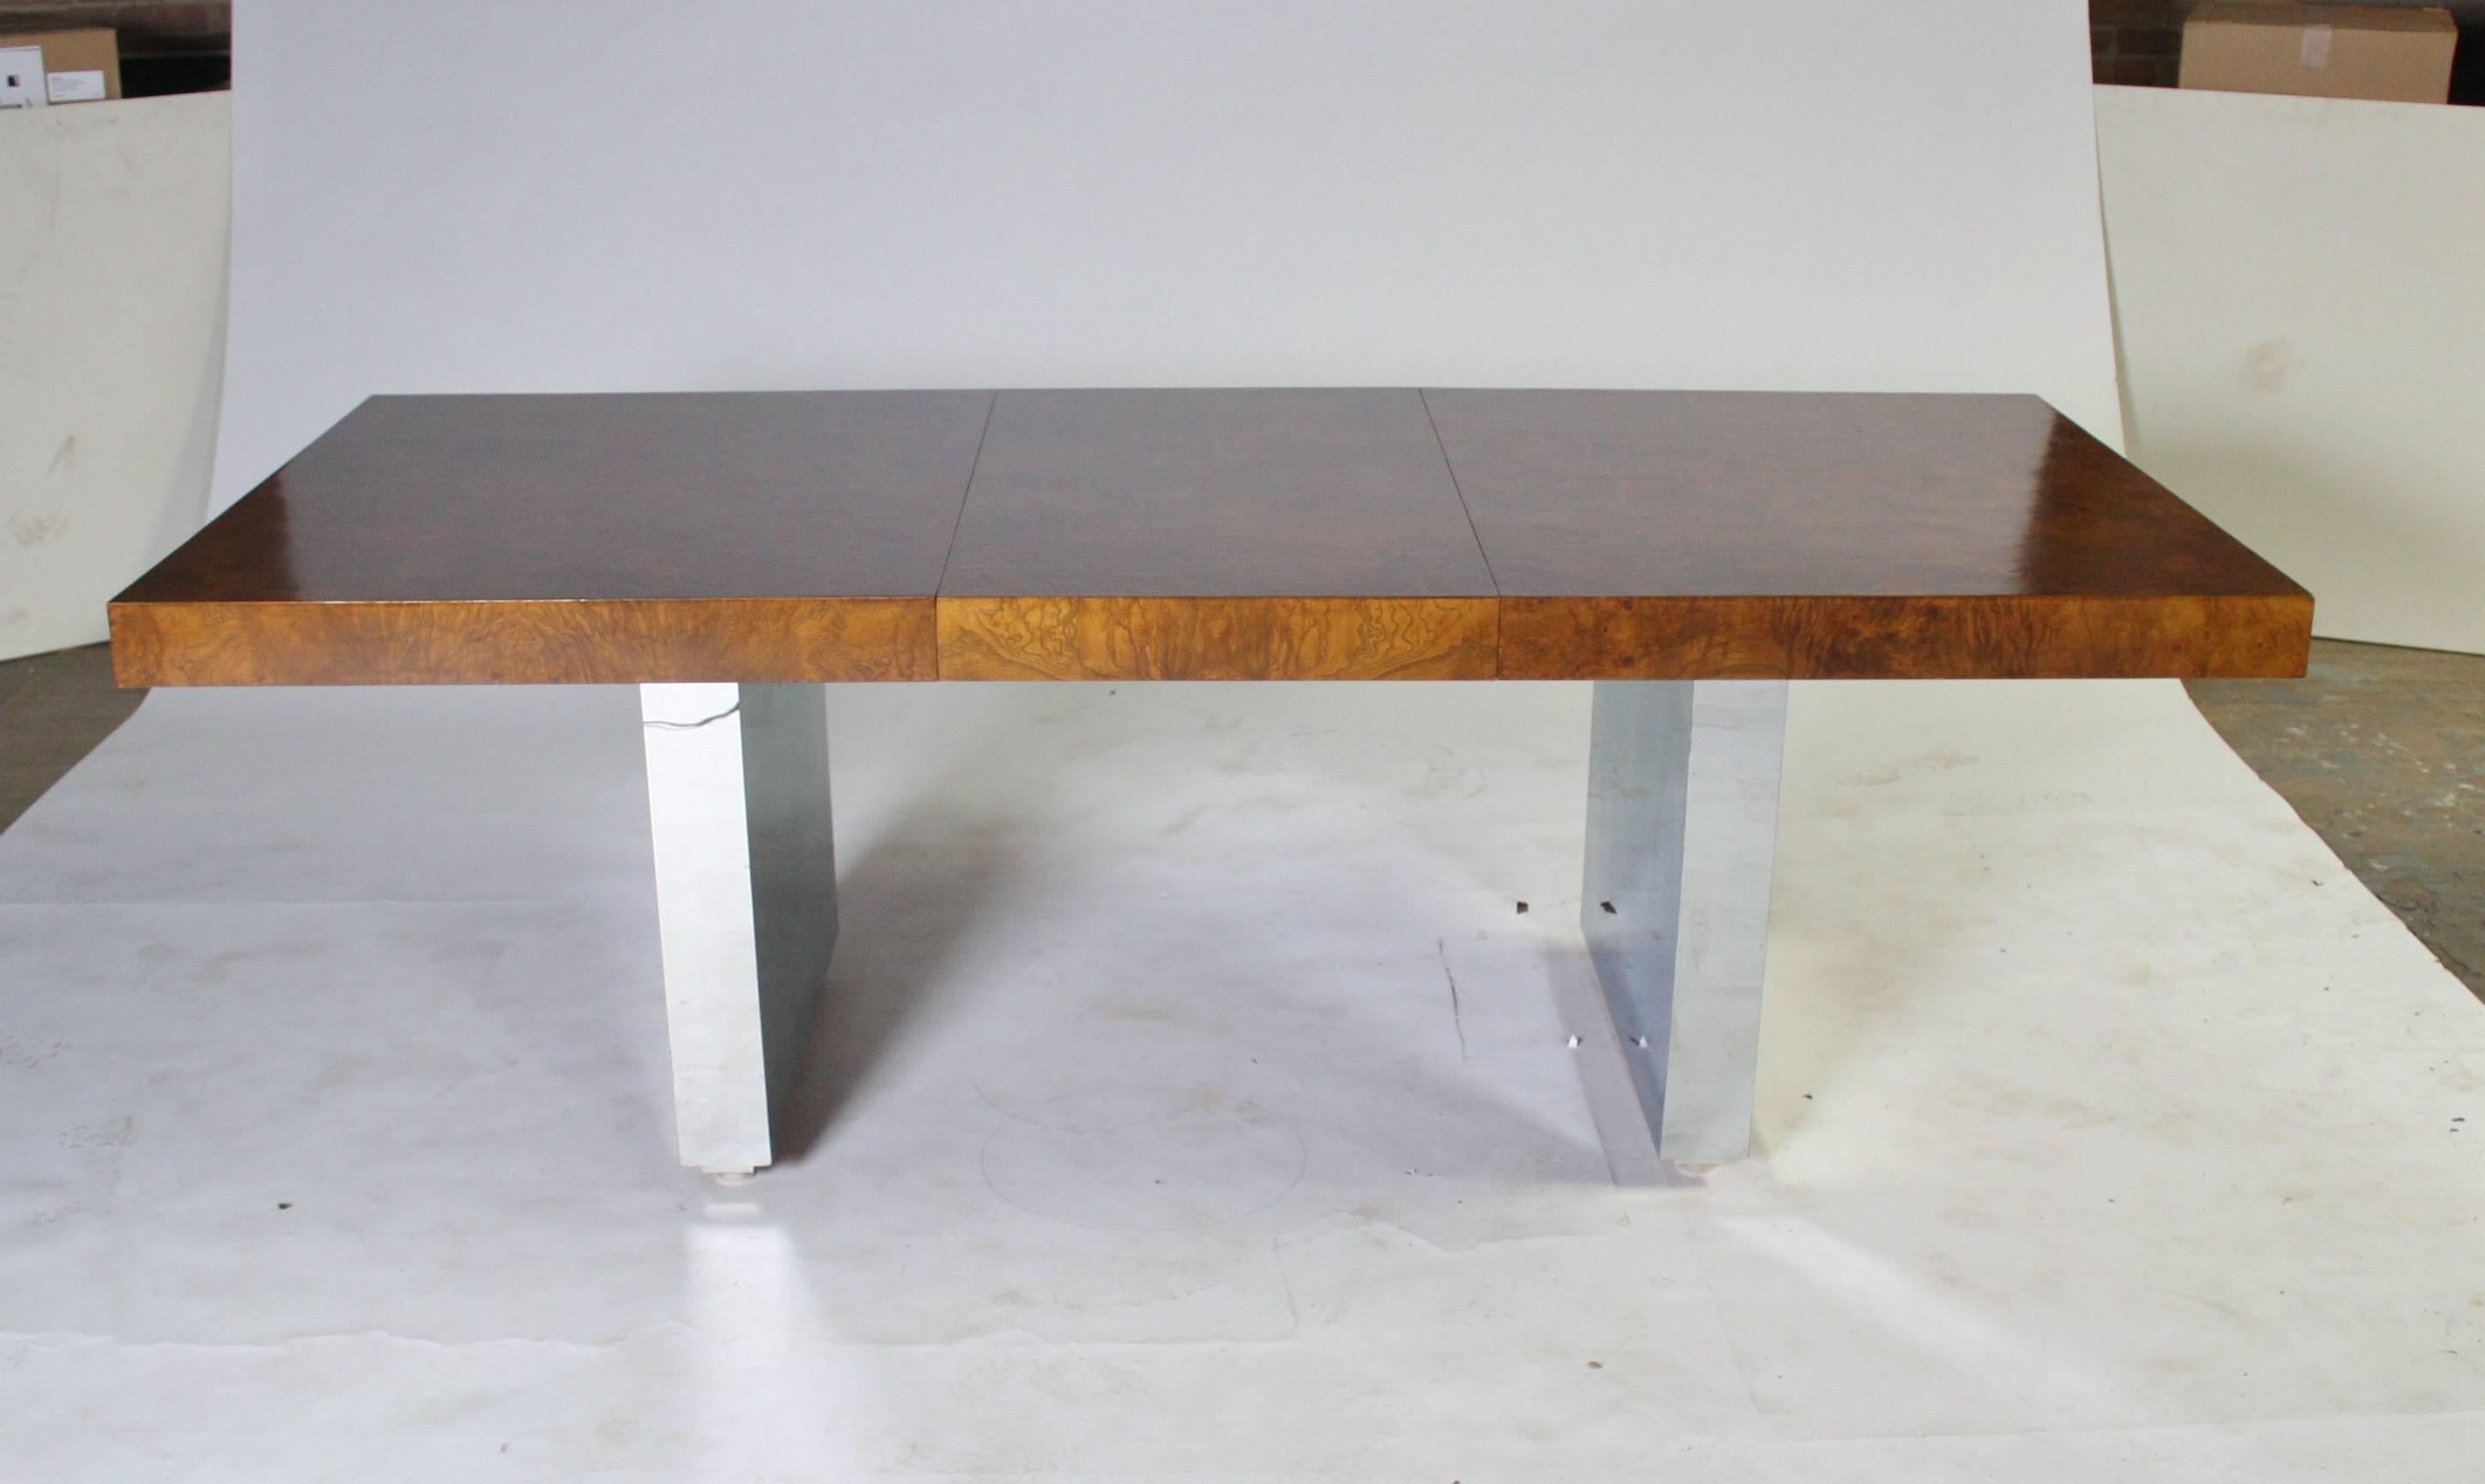 Very rare Milo Baughman style dining table by Roger Springer for Dunbar in a gorgeous walnut burl wood top with two leaves on a polished chrome base. Wood and chrome all in excellent condition. Table base has adjustable feet on glides and slides